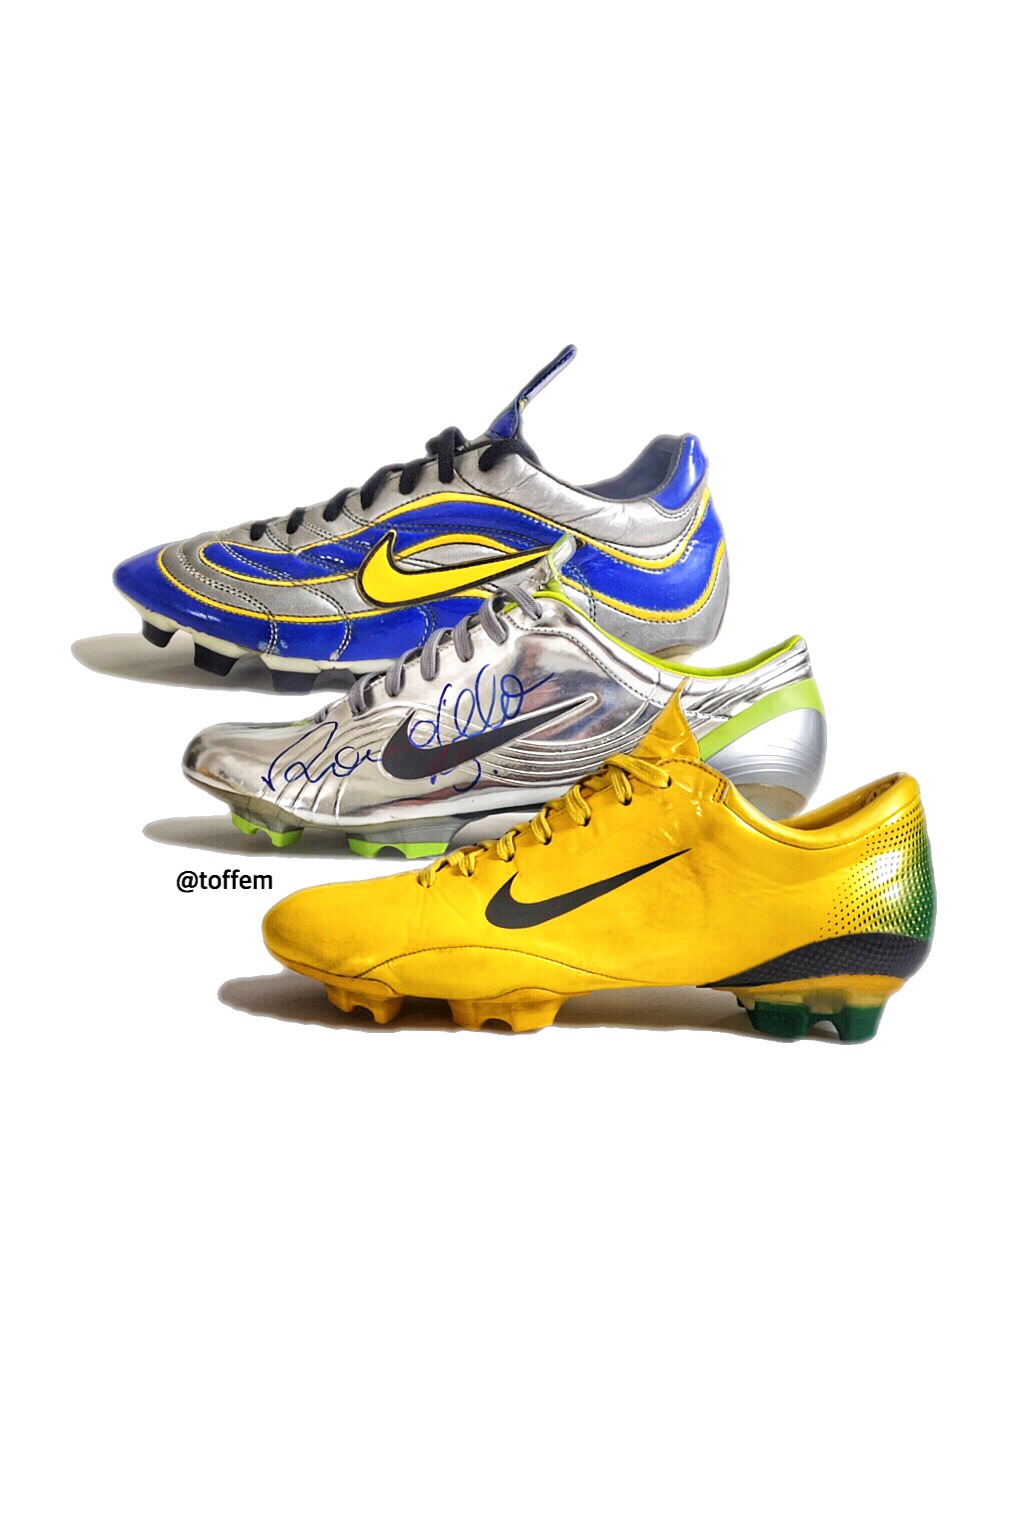 r9 soccer shoes